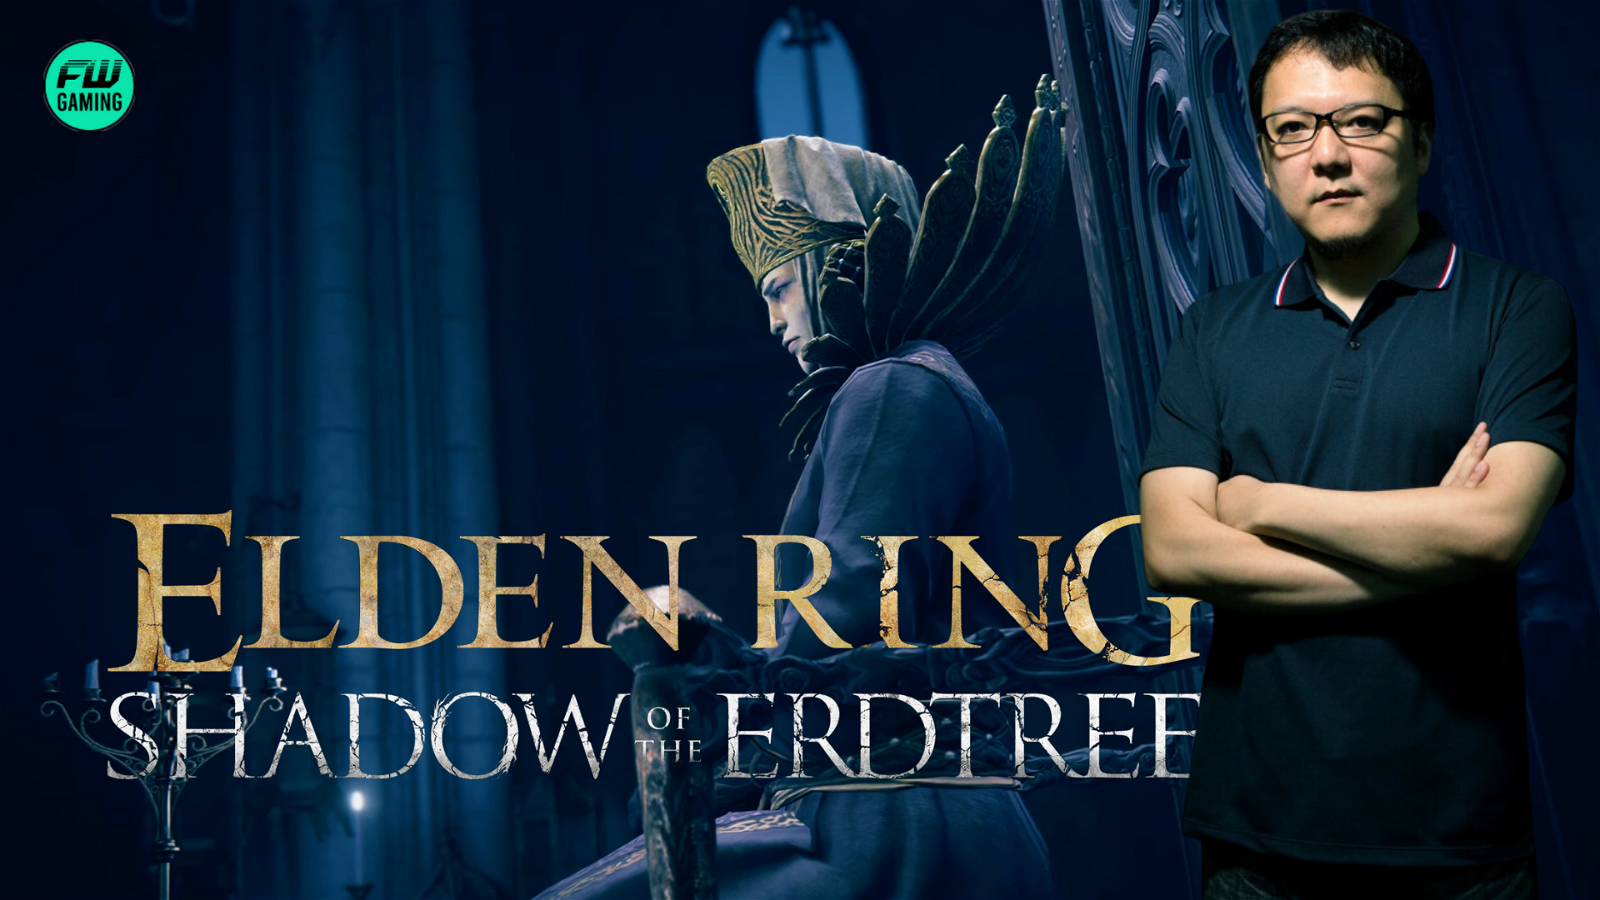 "This same philosophy is taken in Shadow of the Erdtree": Elden Ring's DLC Follows the Franchise First Example the Main Game Set, According to Hidetaka Miyazaki